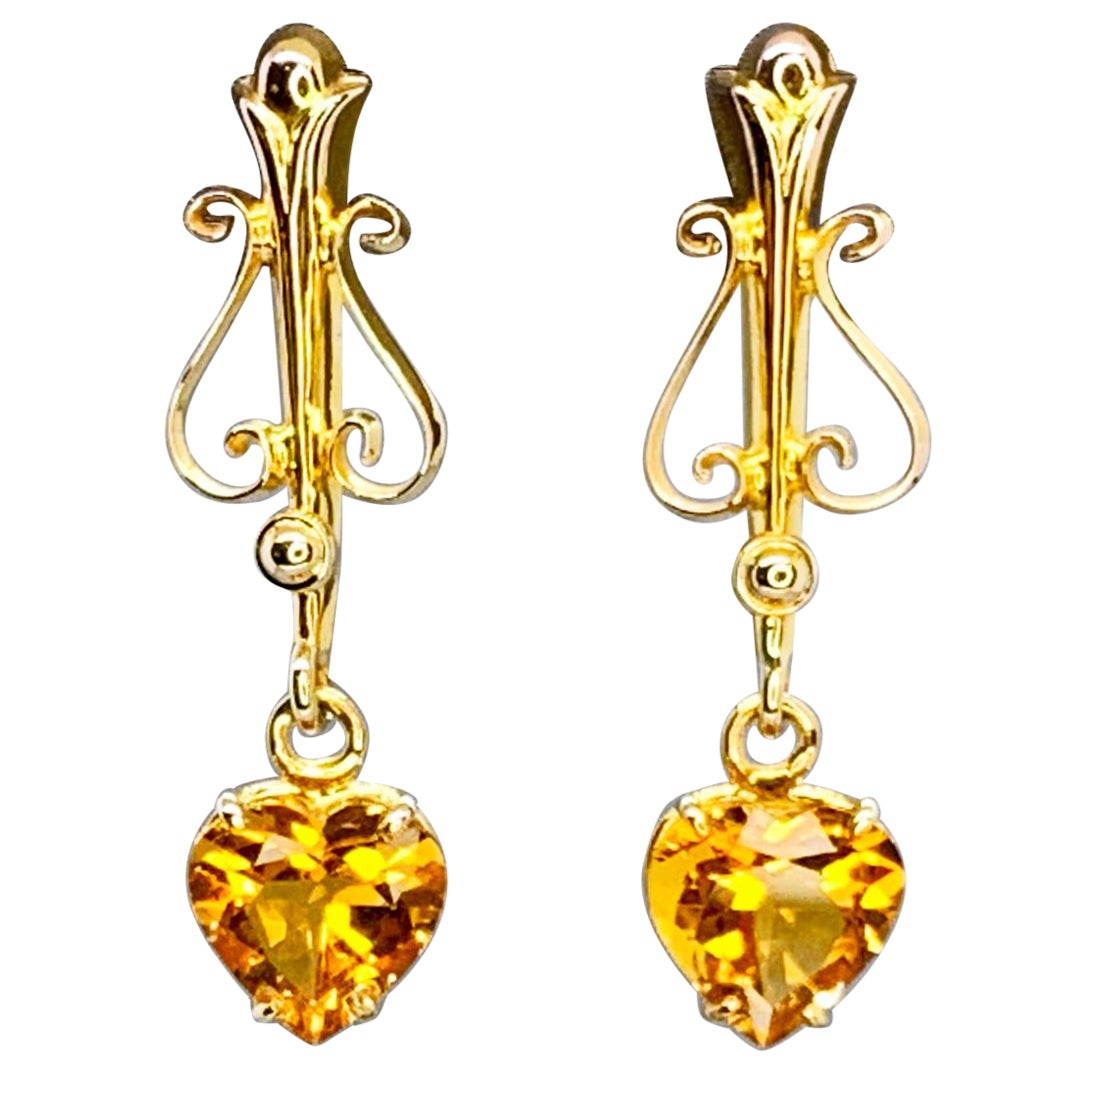 Upcycled gold and 4.27 carat citrine heart earrings in a Baroque style by G&GS